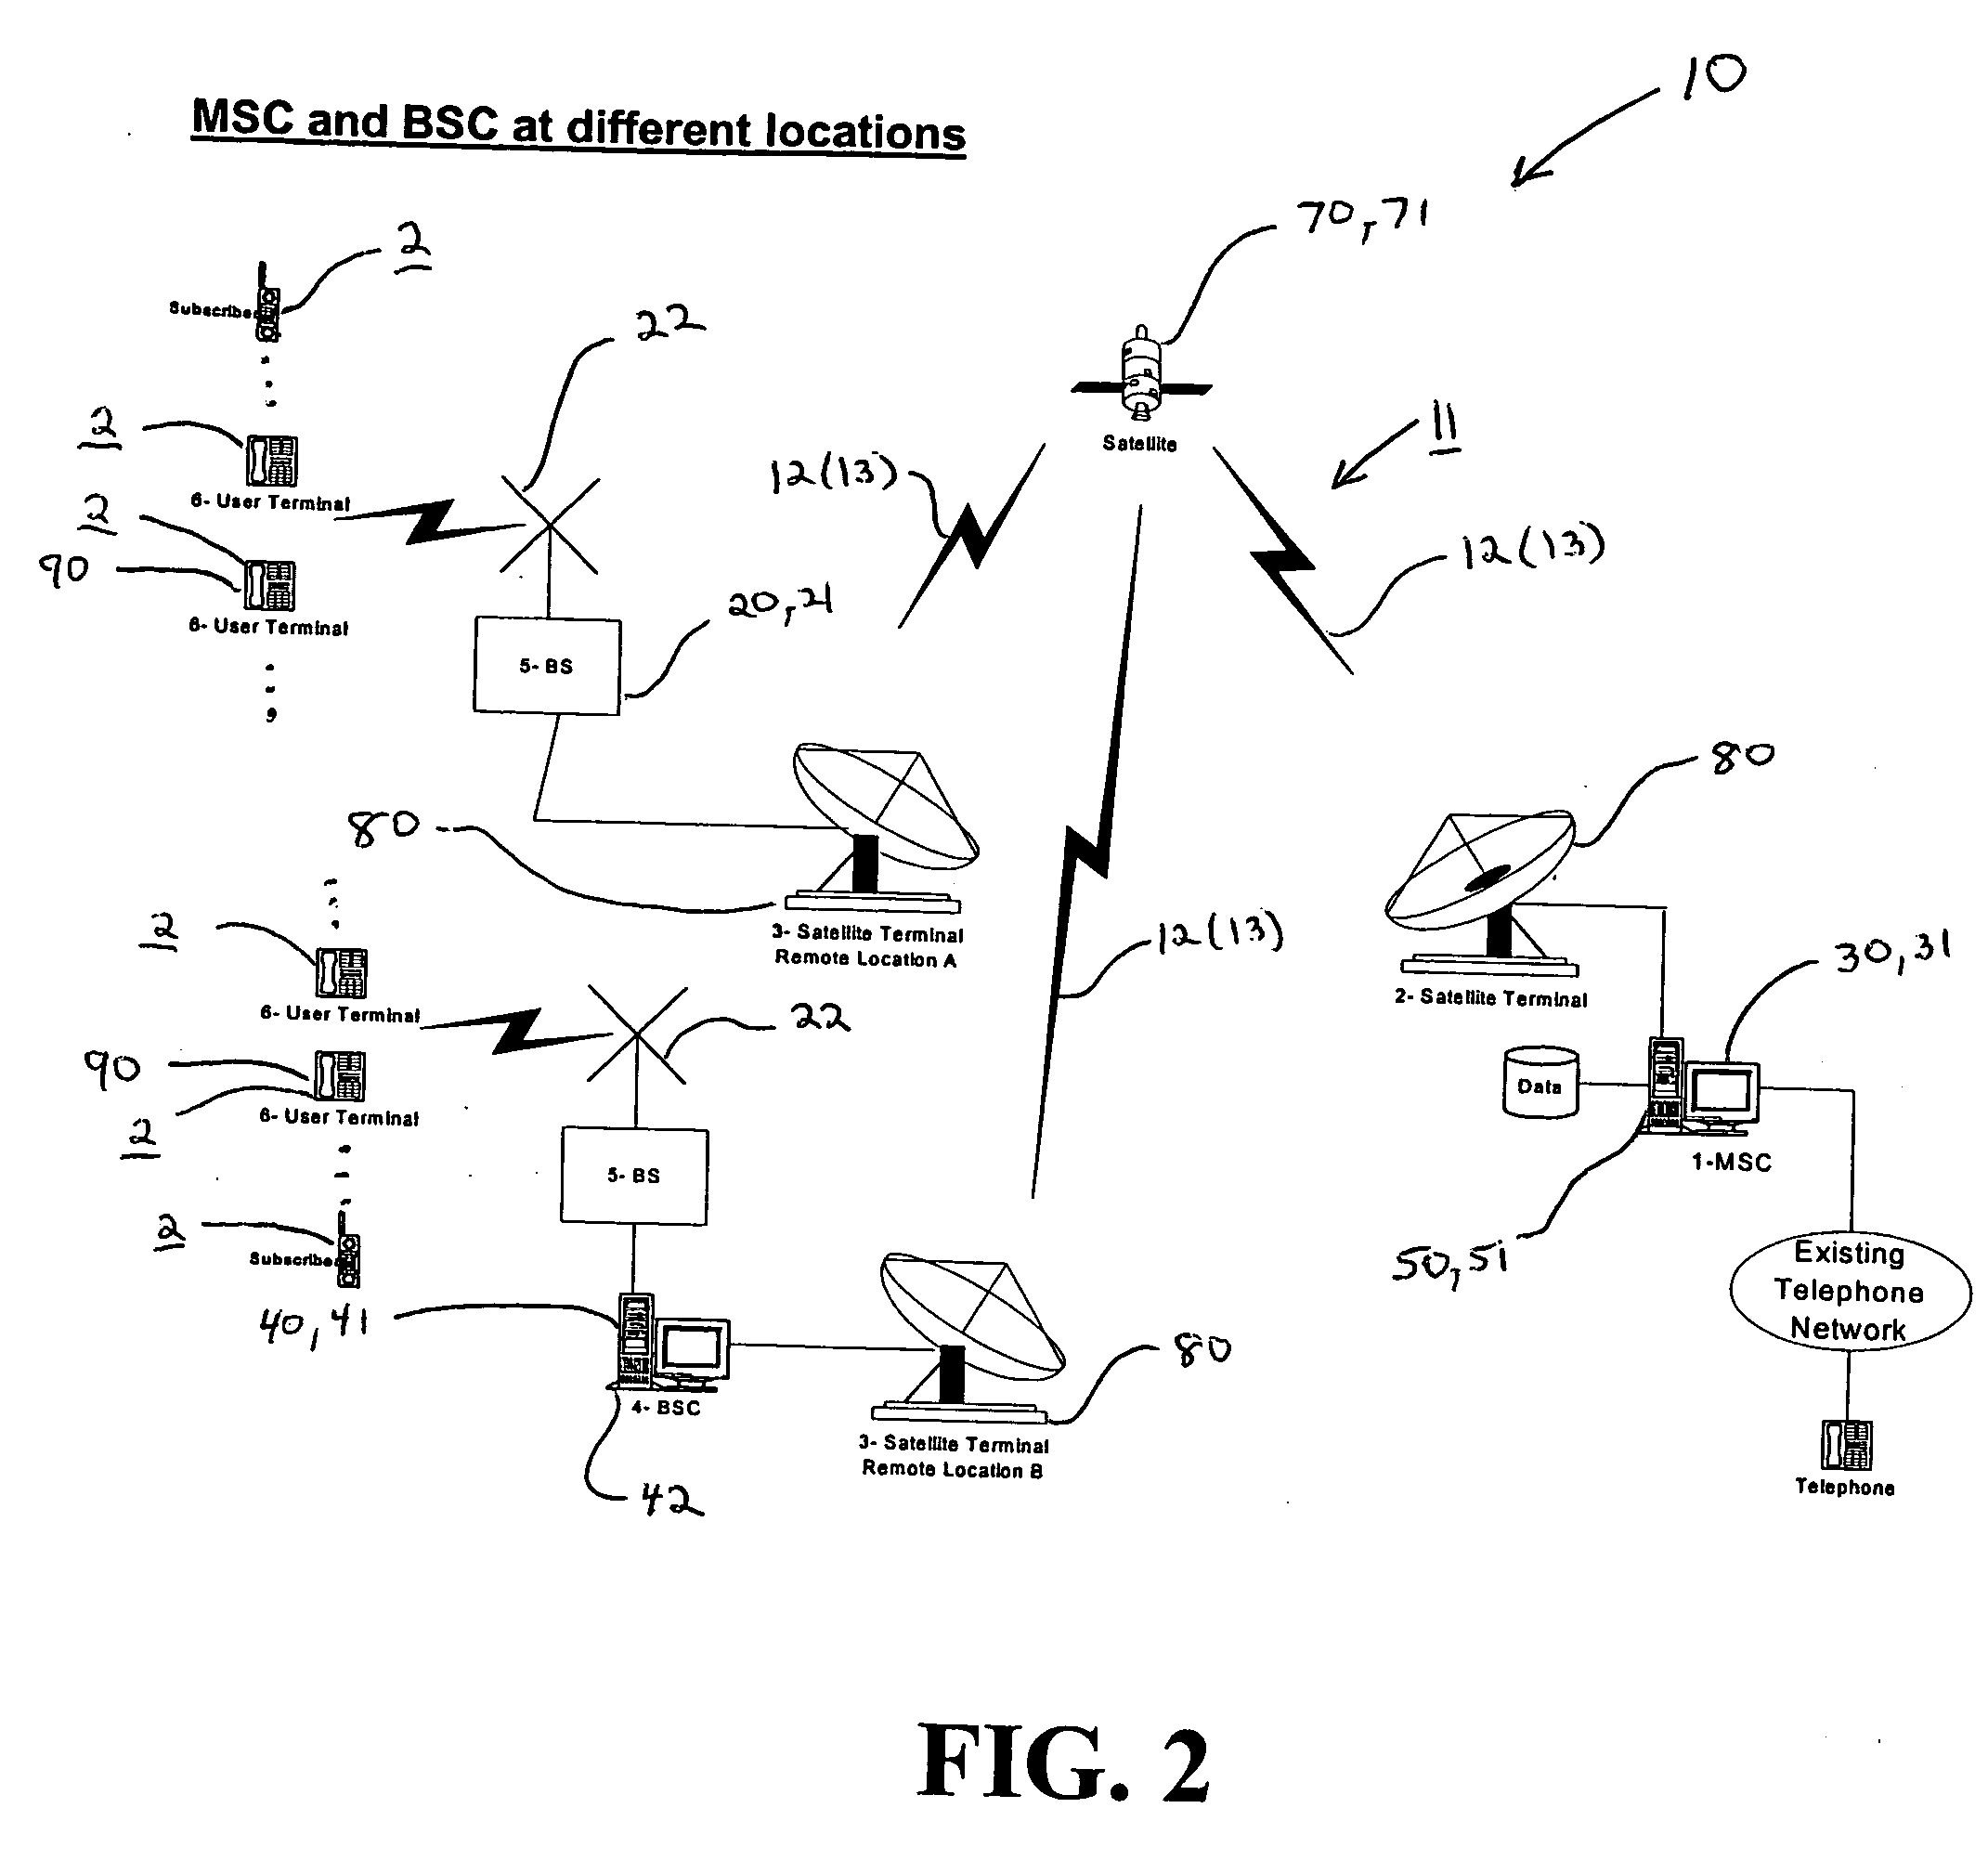 Distributed satellite-based communications network and method of providing interactive communications services using the same